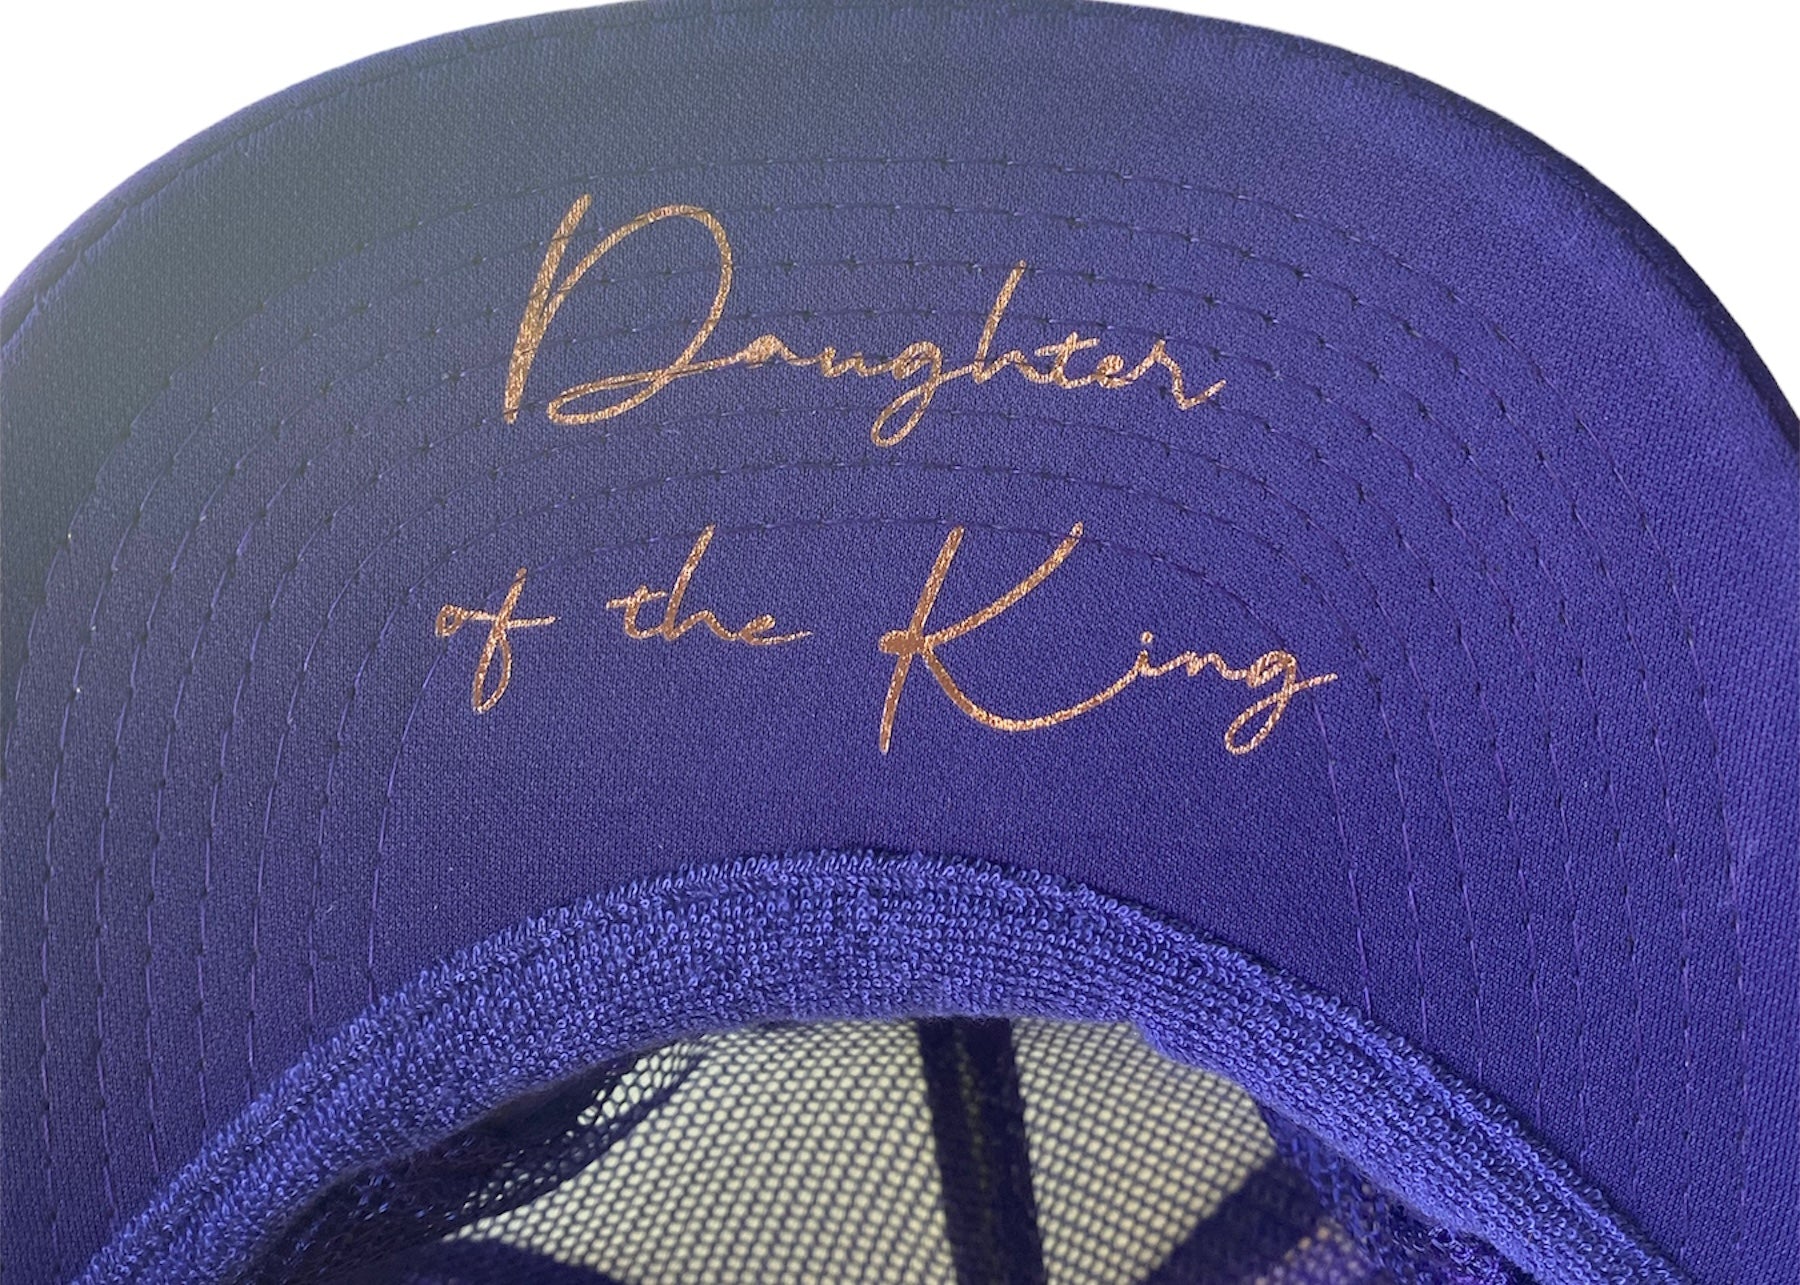 “Daughter of the King” Poni Lei Po’o Trucker Hat